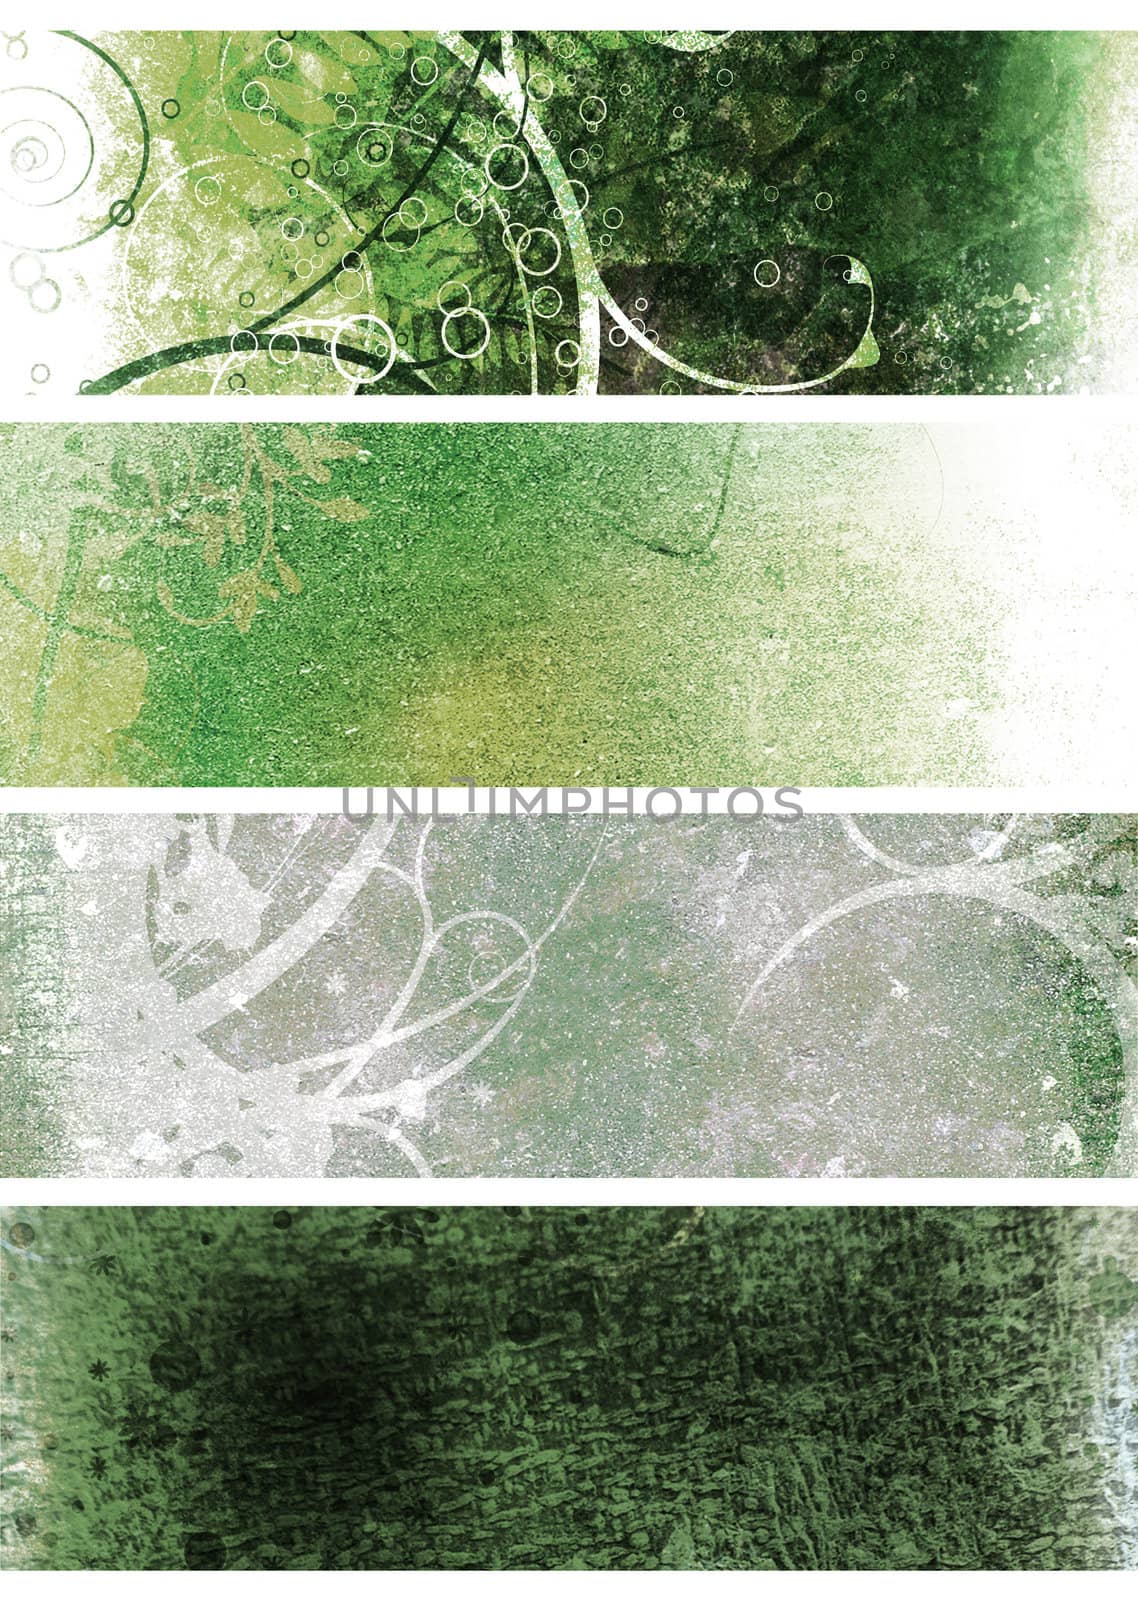 Green and white natural grunge background